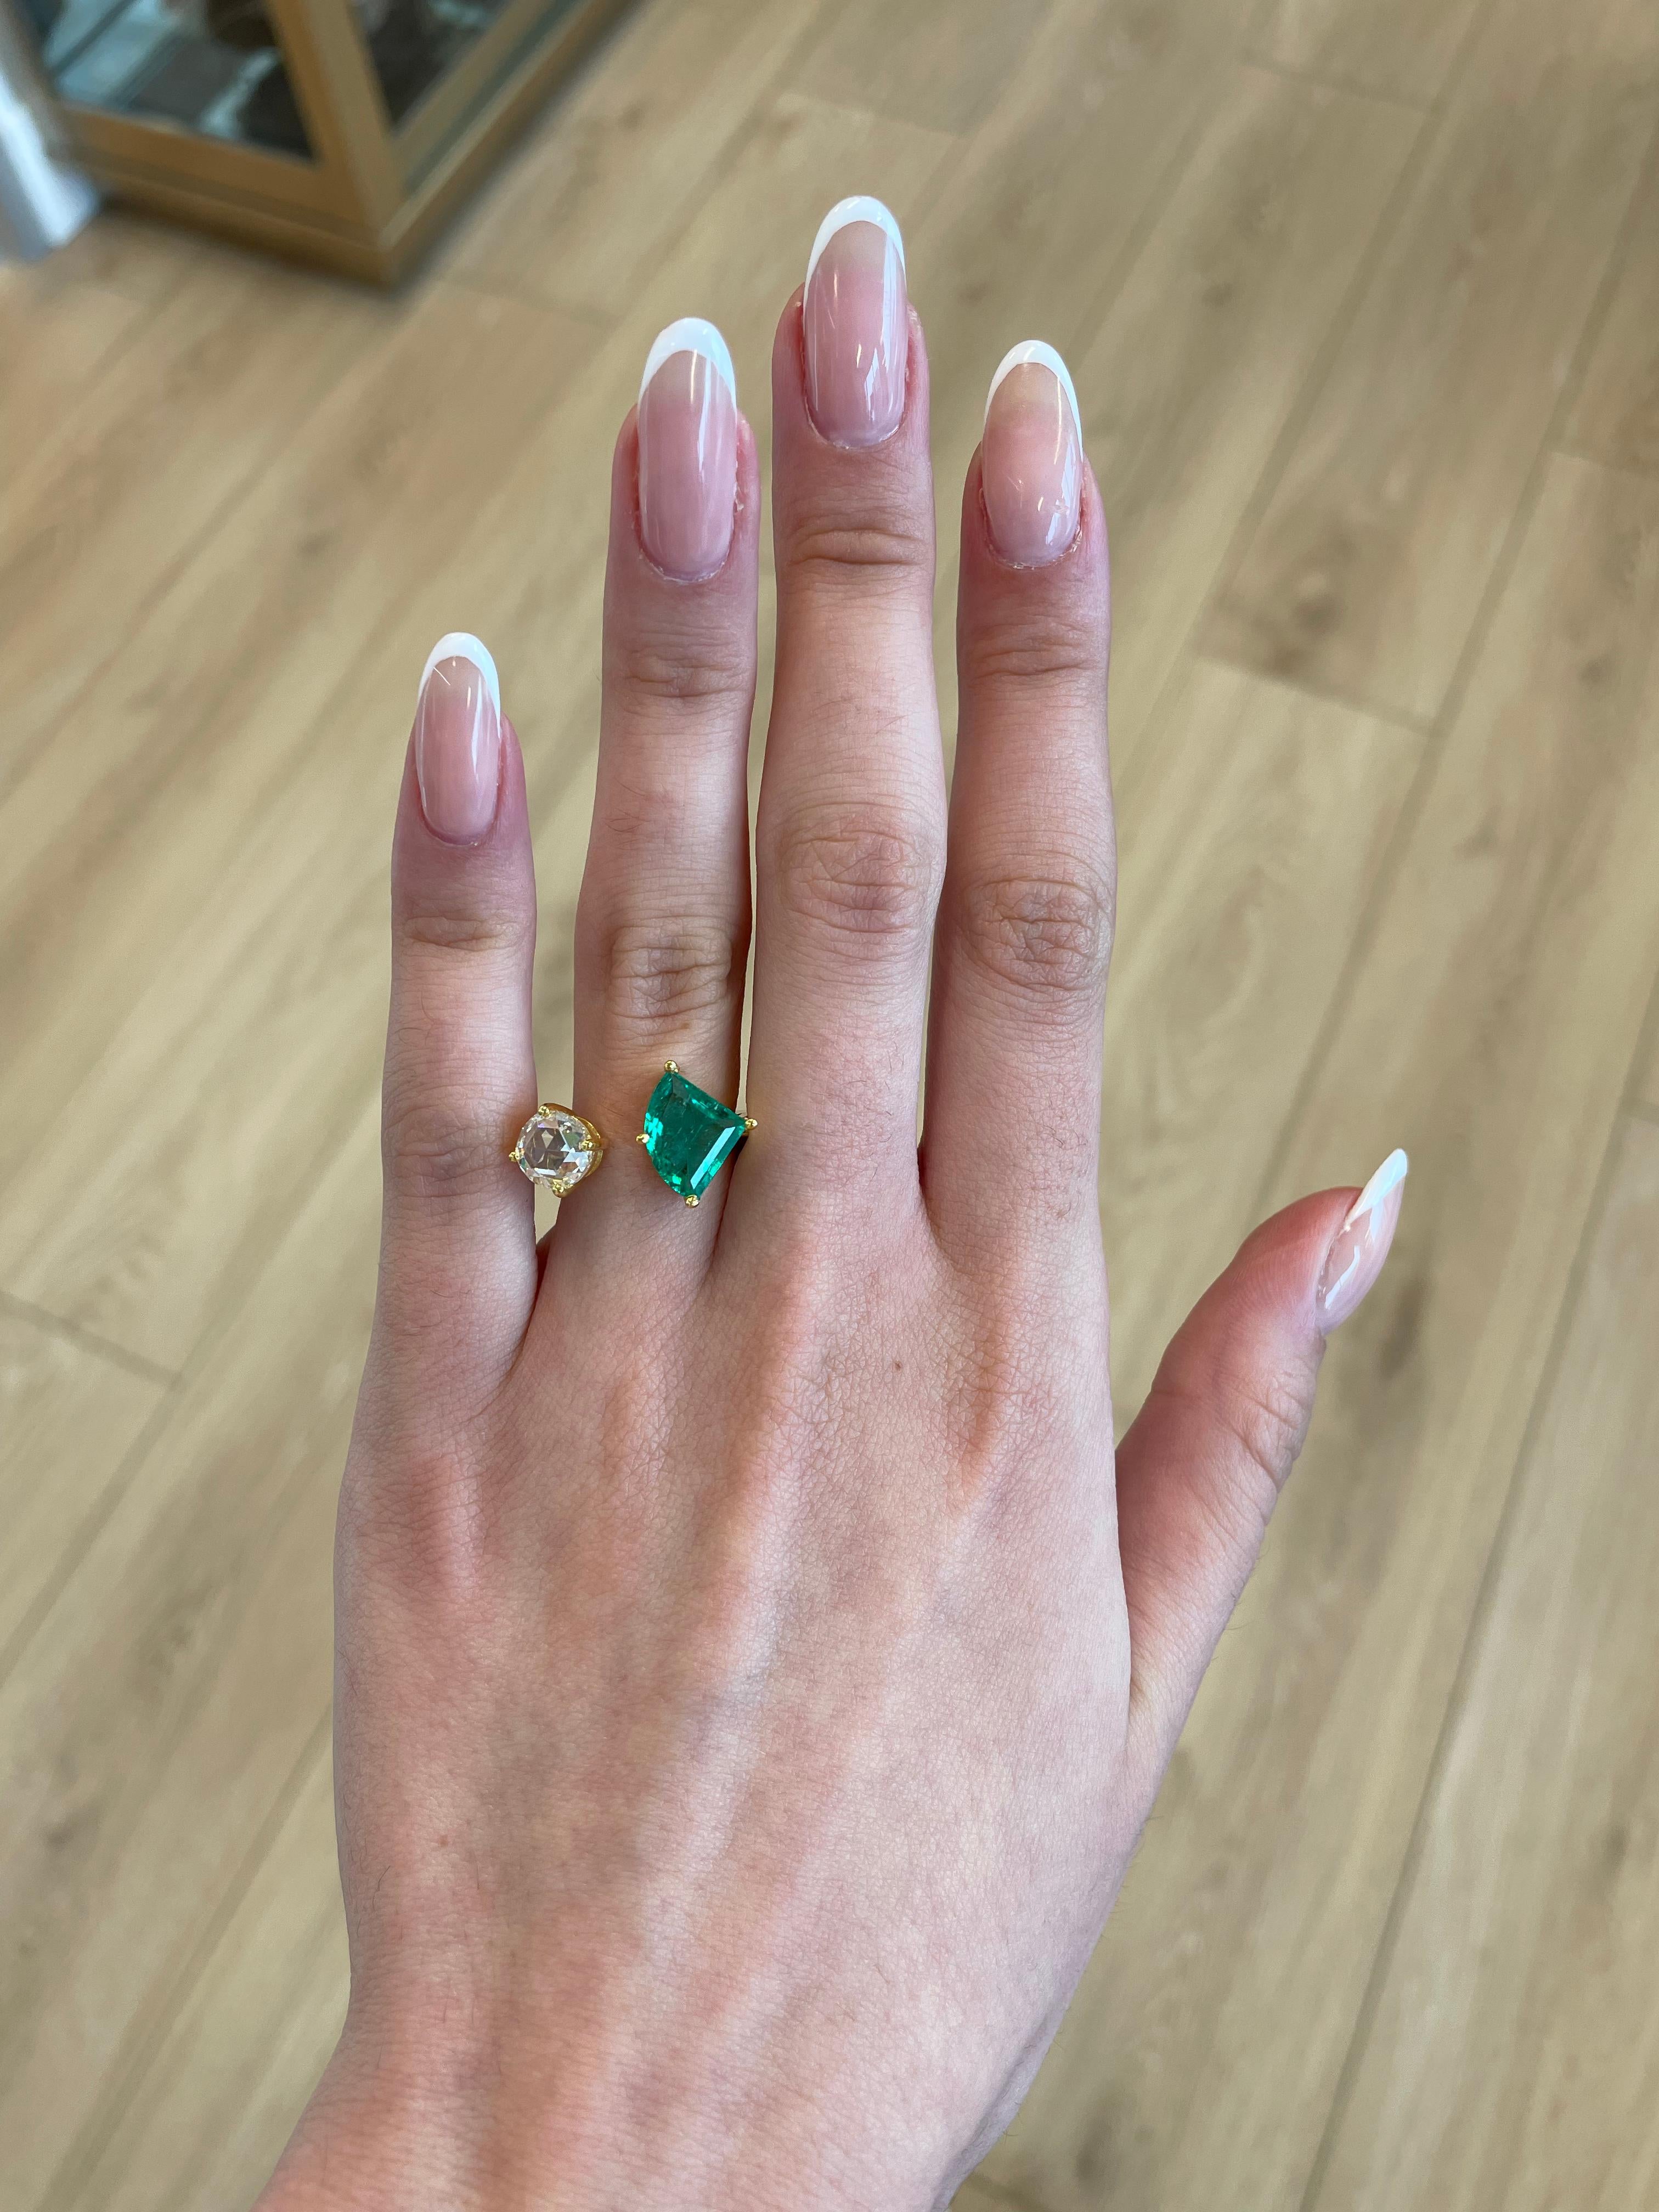 Stunning modern floating emerald and diamond toi et moi ring. By Alexander Beverly Hills.
1 kite shape emeralds, 1.79 carats apx F2. 1 round rose cut diamond 1.32 carats, approximately G/H color and VS clarity. 18-karat yellow gold, 6.28 grams,